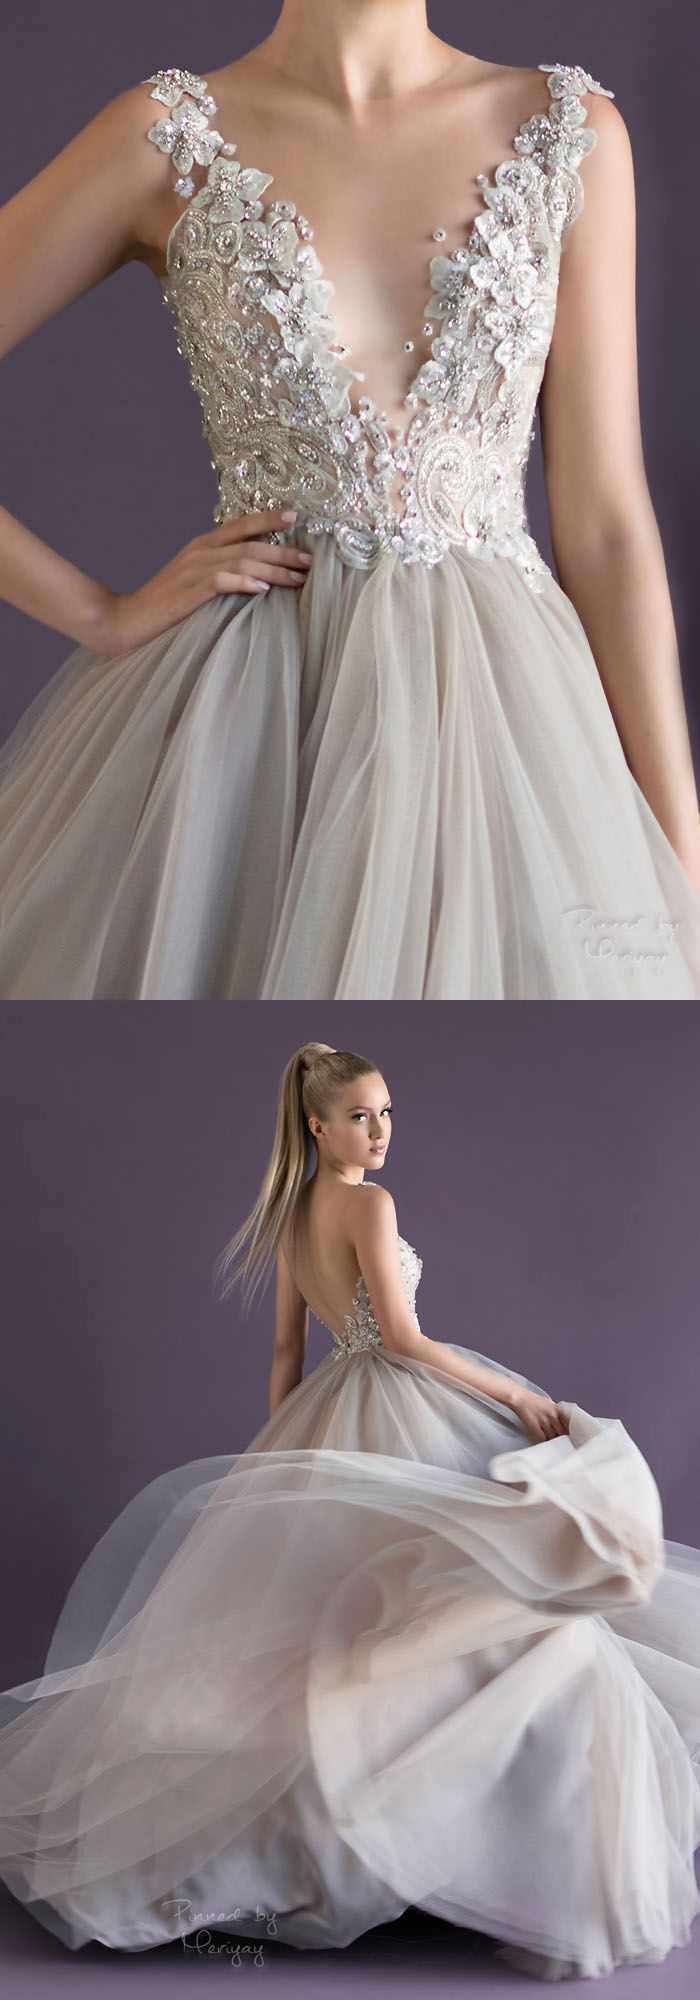 My Nan loves this dress, and its so interesting how the straps stop at the front (Paolo Sebastian).